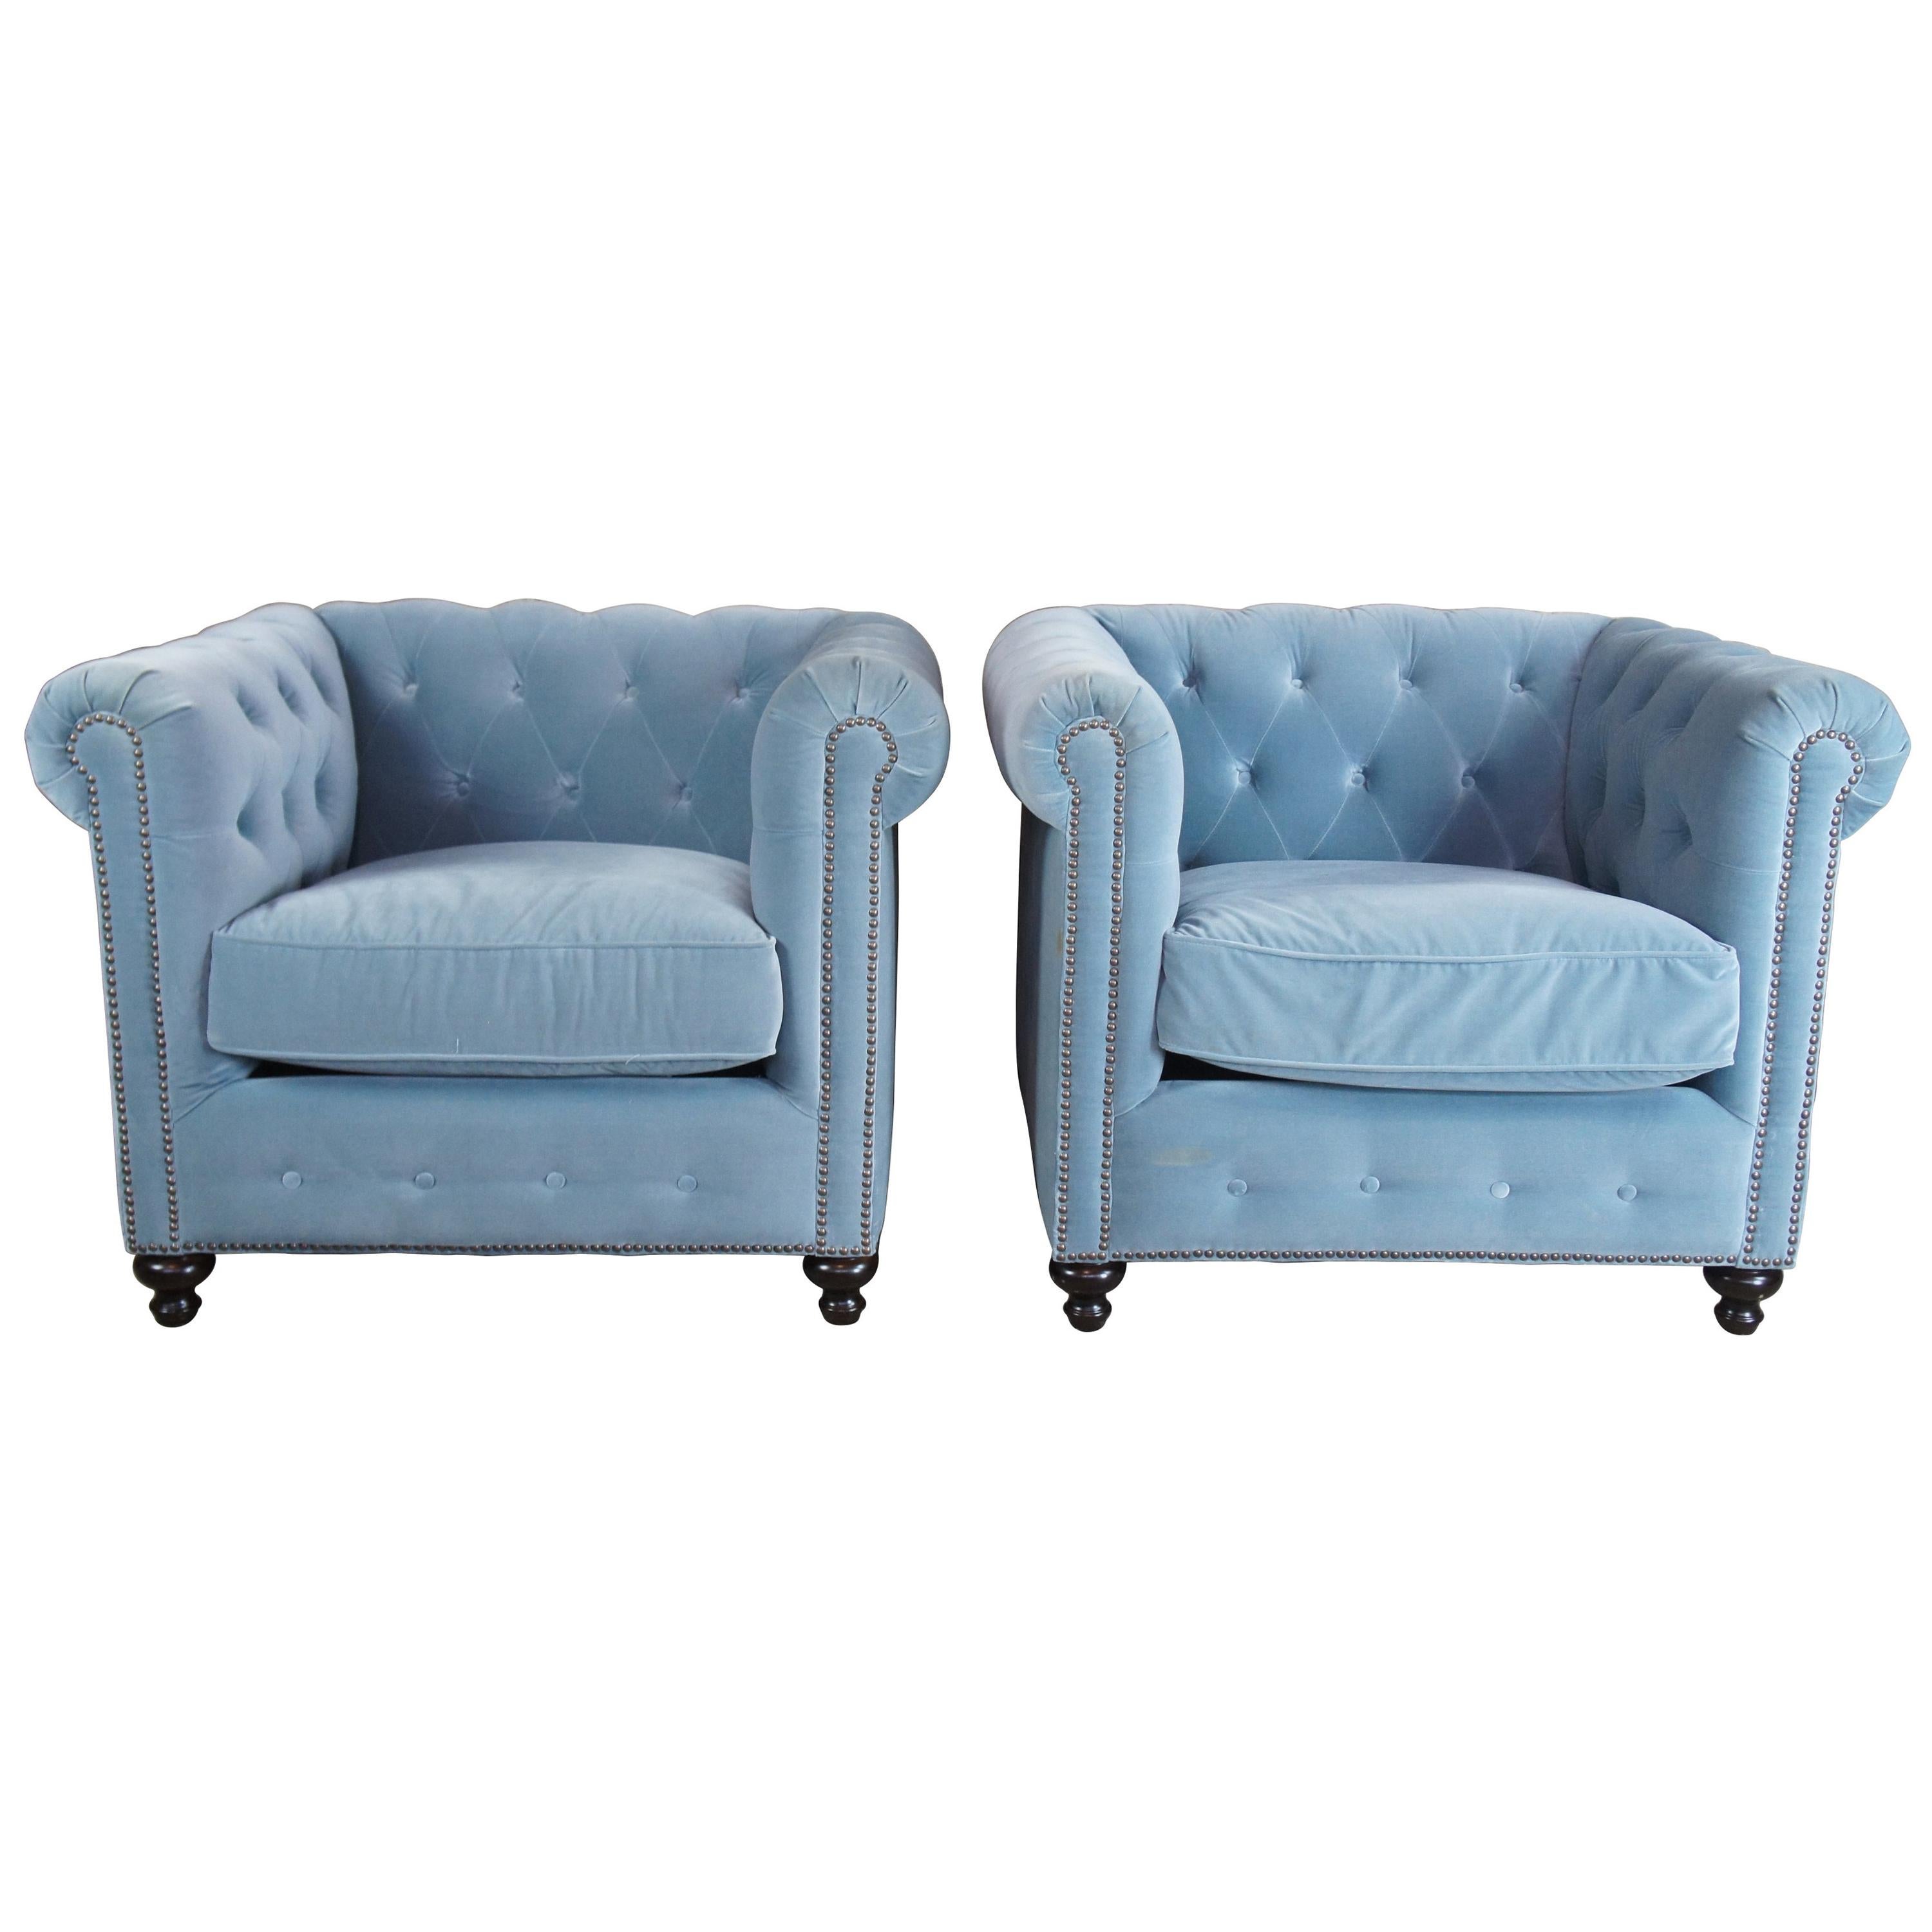 2 Frontgate Barrow Chesterfield Tufted Club Library Chairs Blue Nailhead Modern